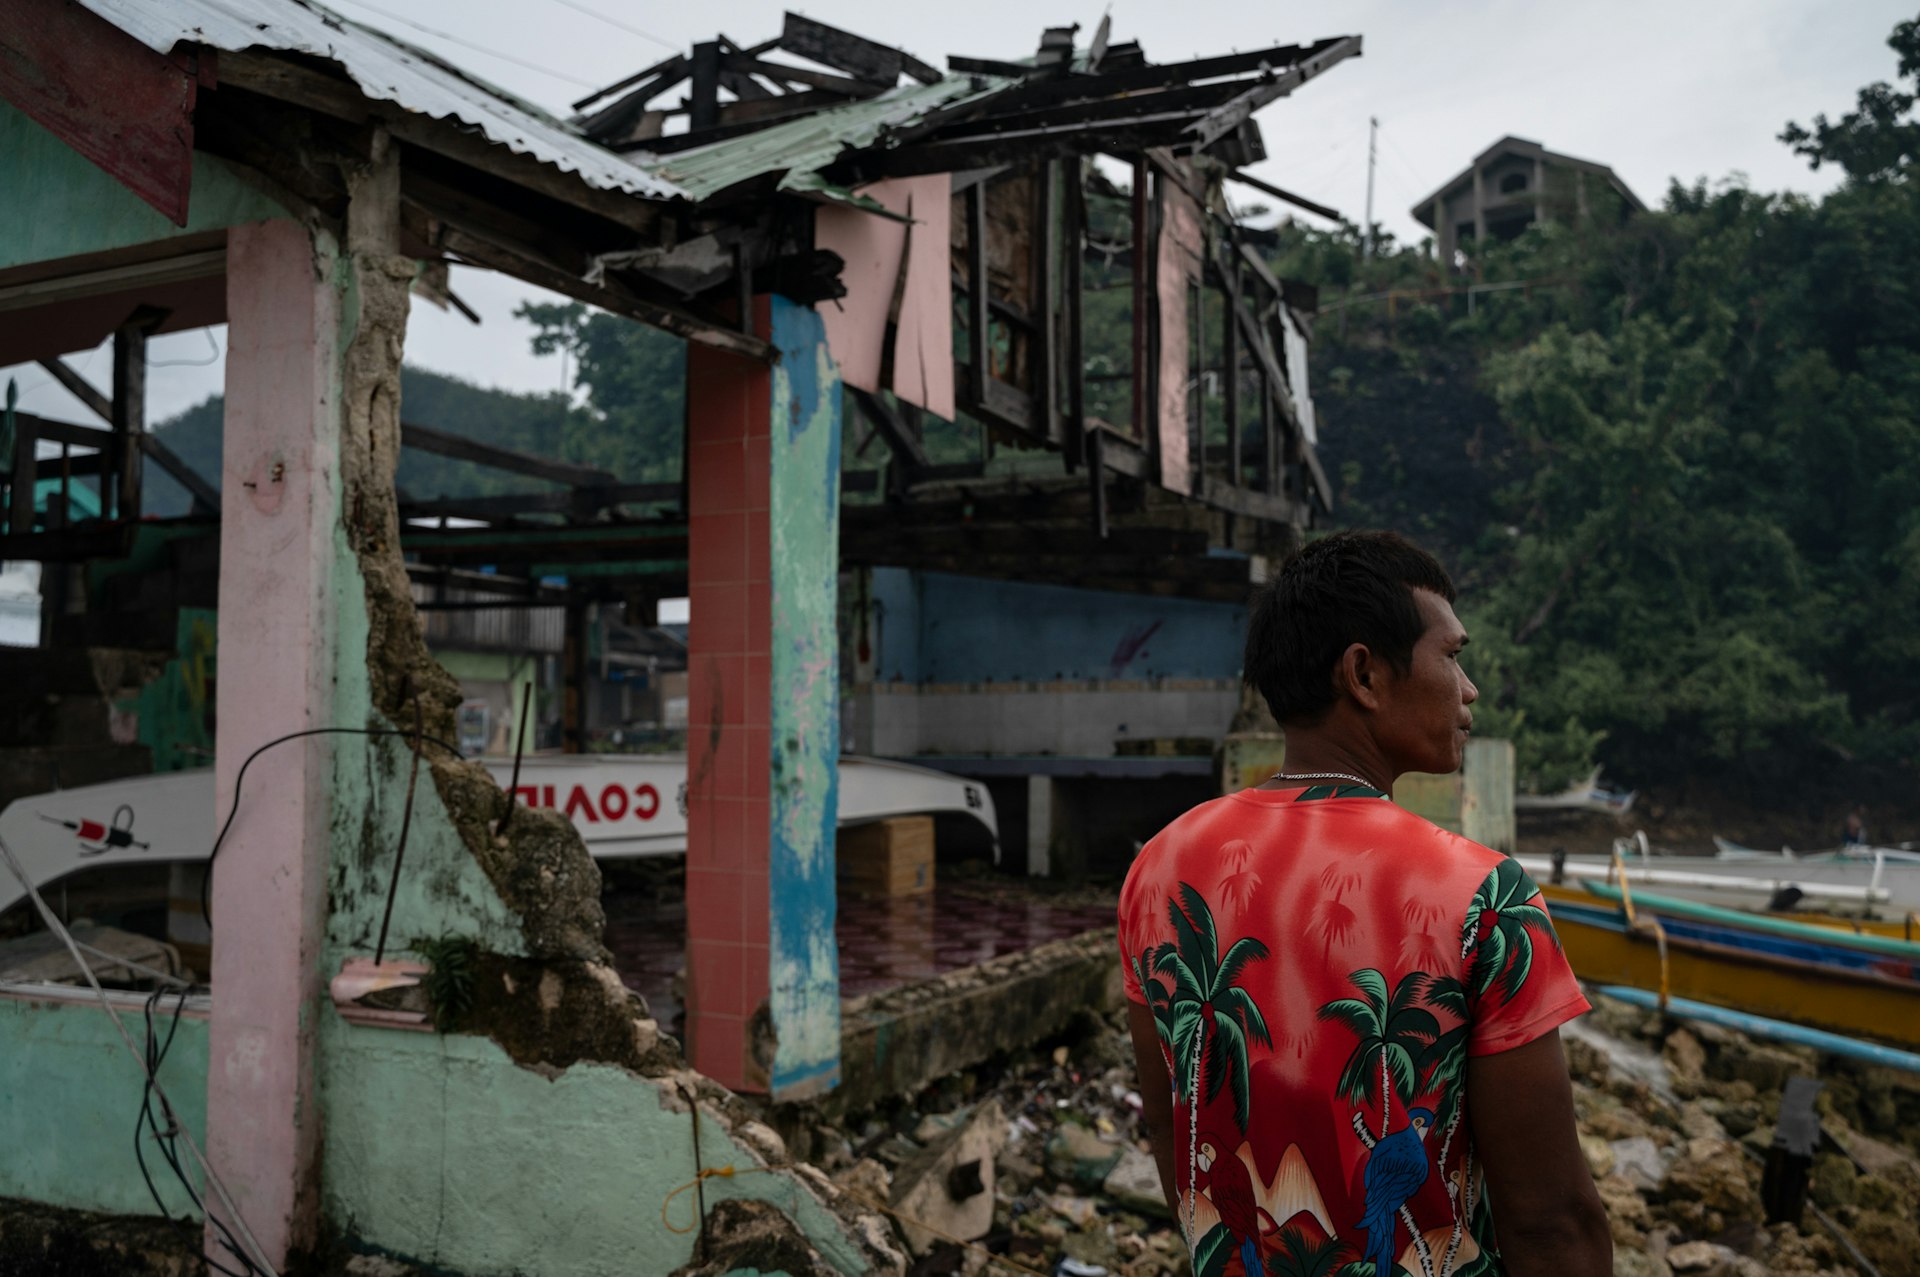 Capturing the resilience of Filipino coastal communities at the frontlines of climate change